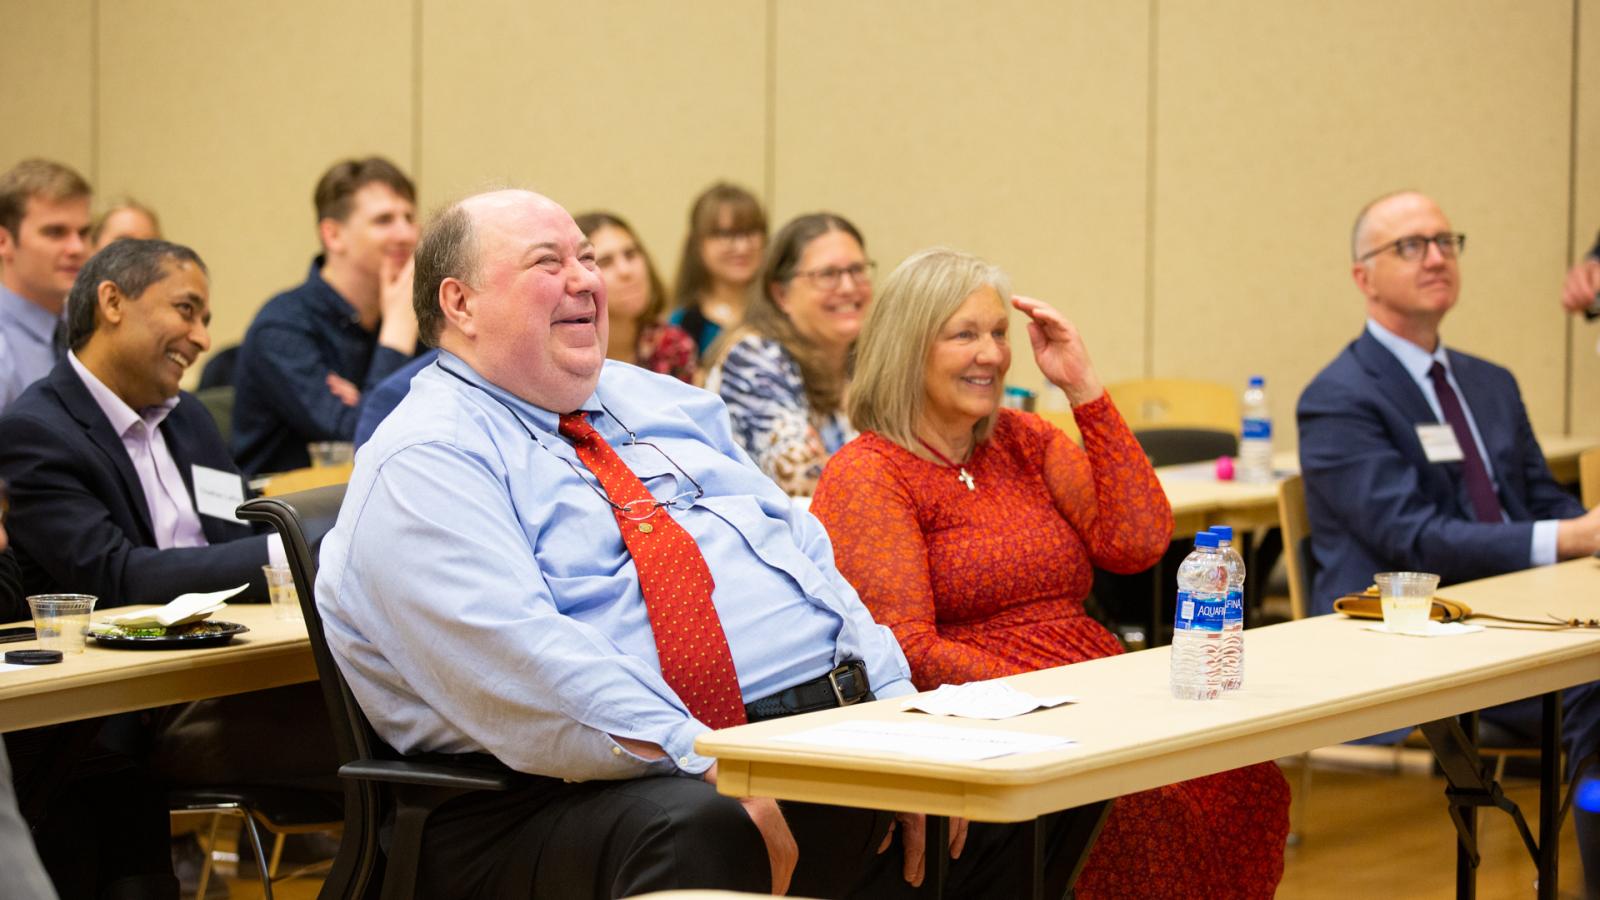 Dr. Jürgen Venitz, M.D., Ph.D., a professor of pharmaceutics at the VCU School of Pharmacy, smiles during a series of heartfelt alumni video messages played during the school’s annual Research and Career Day.